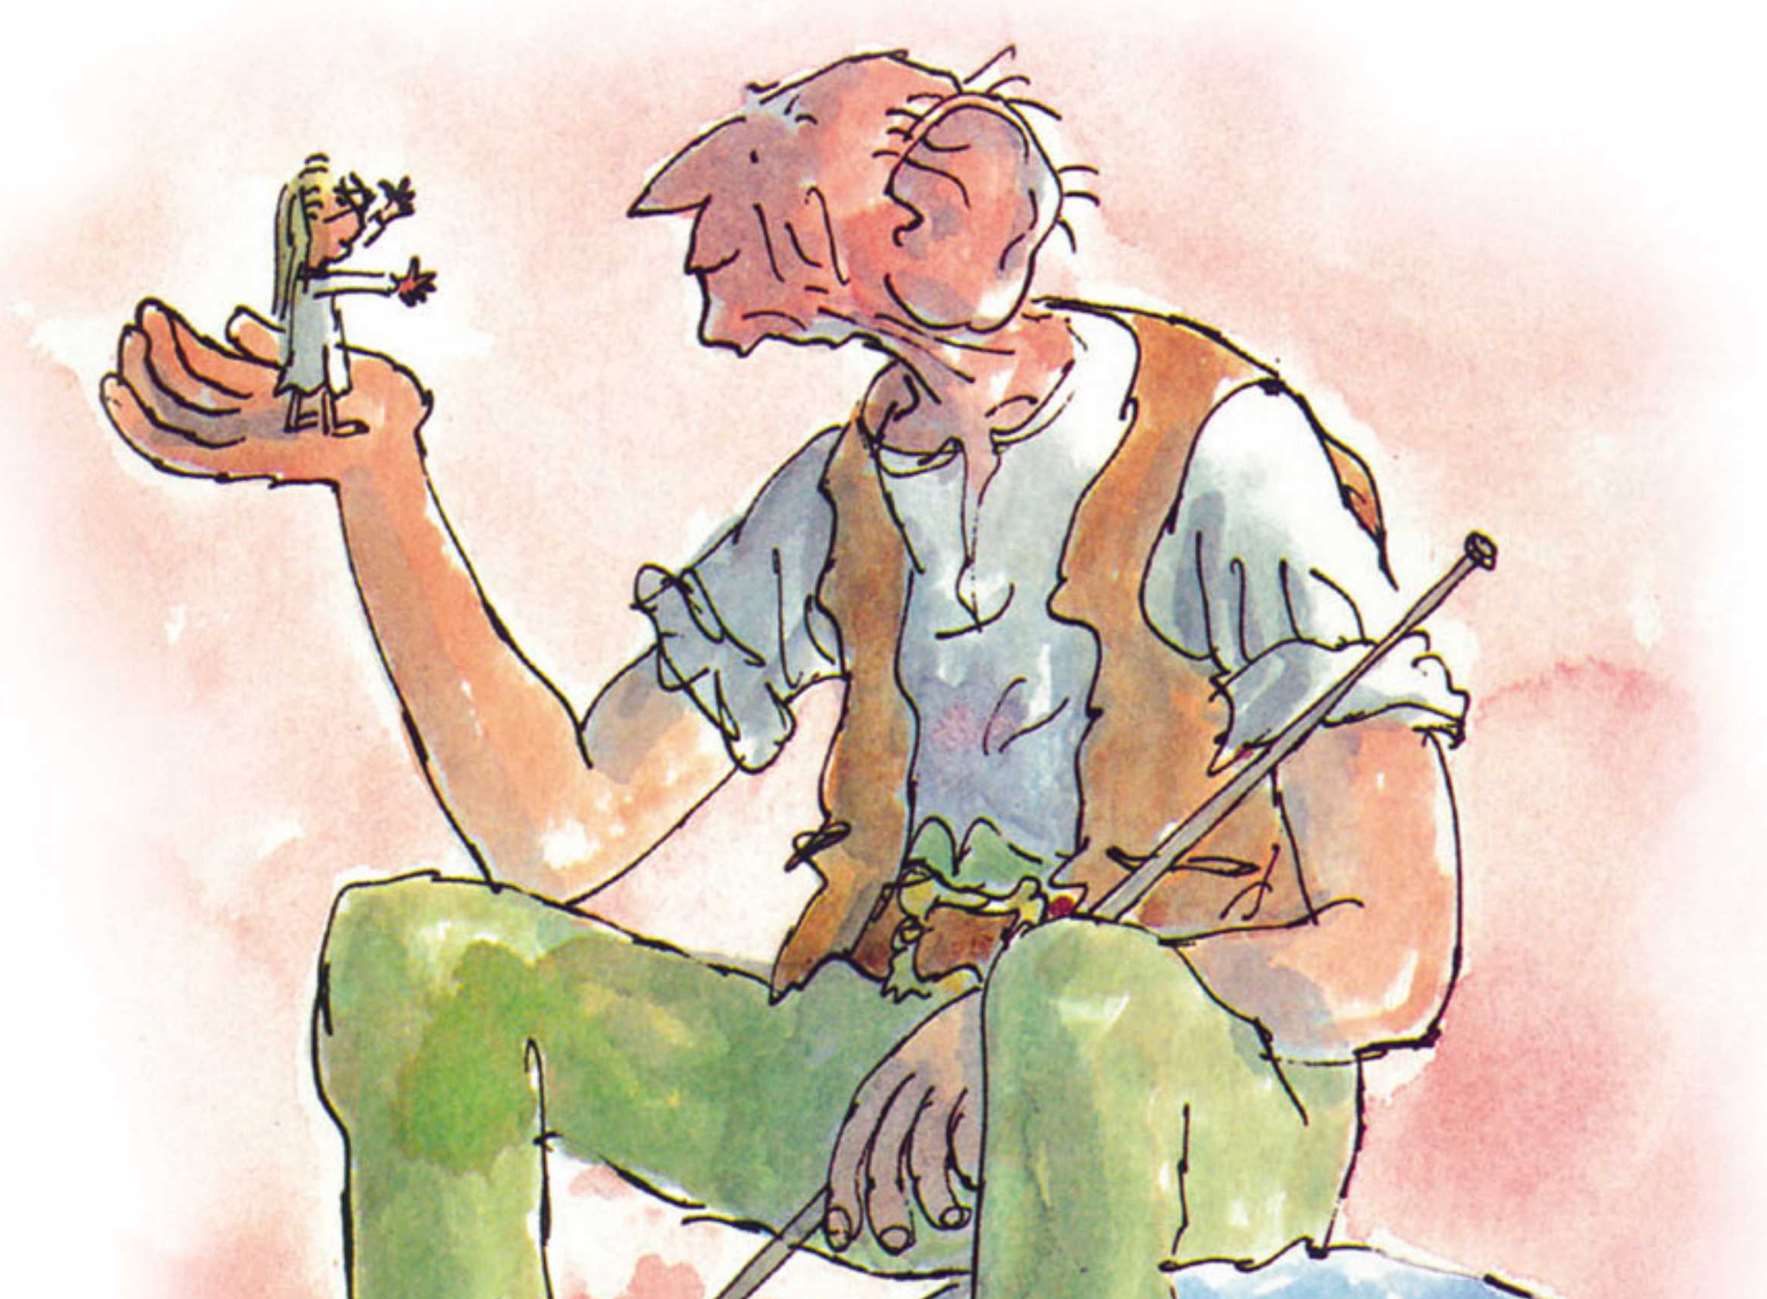 The BFG comes to The Beaney Picture: The House of Illustration